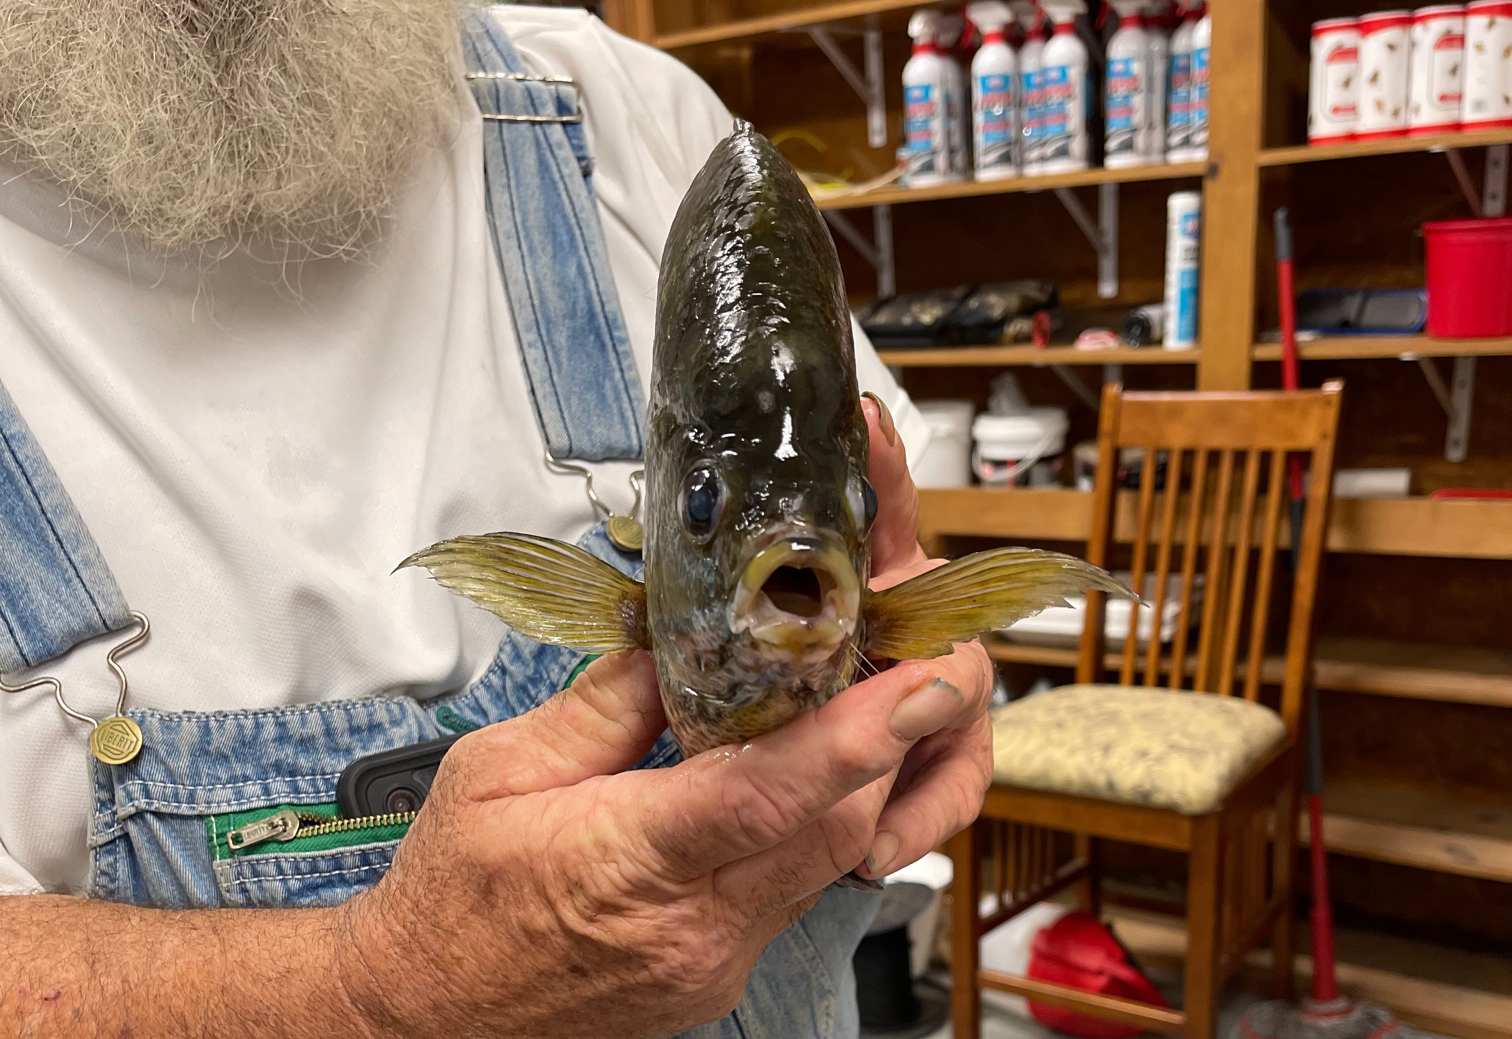 Retired Welder Catches New Louisiana State-Record Bluegill From His Neighbor’s Pond